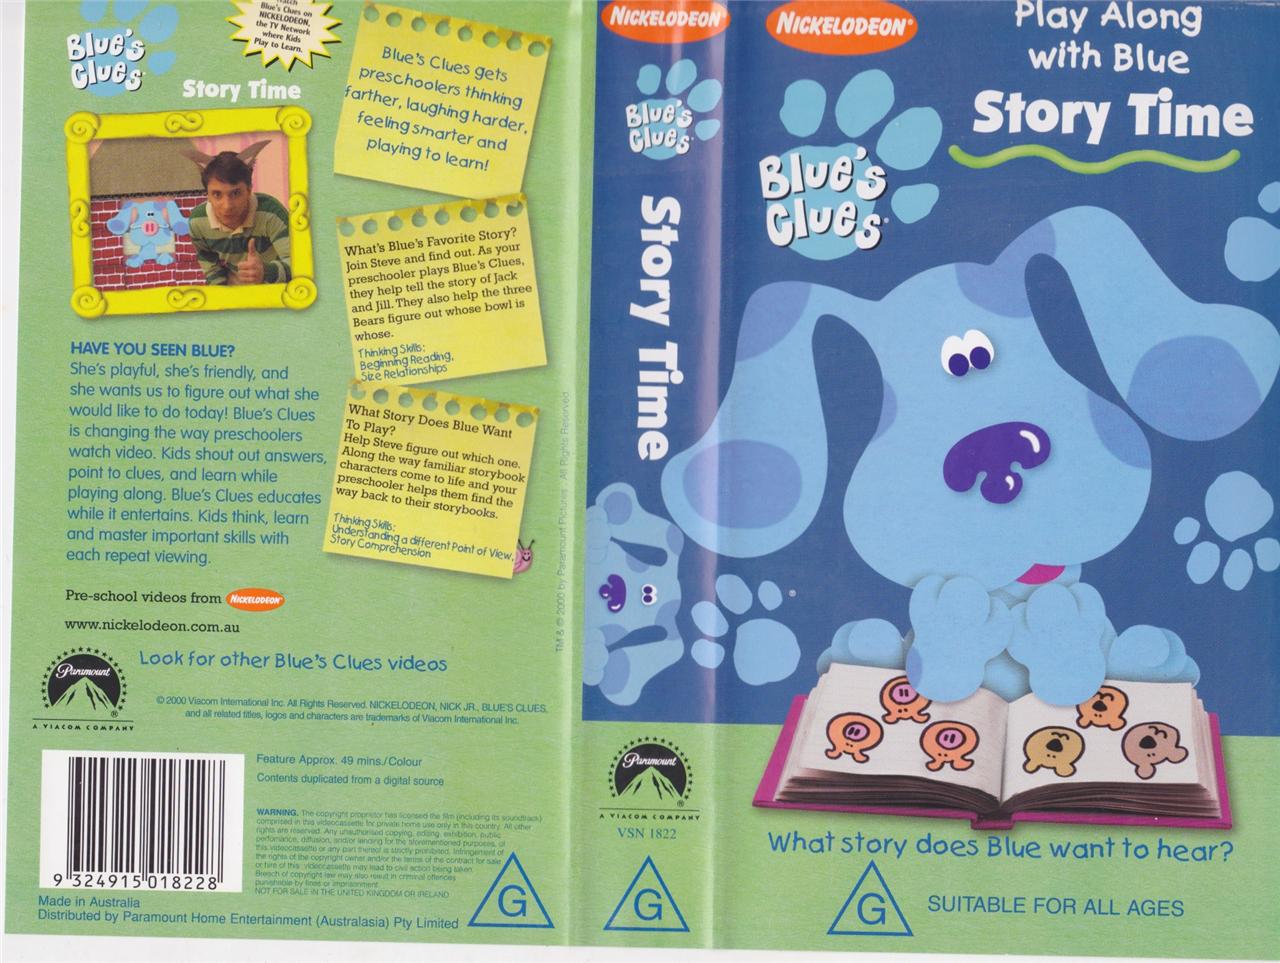 BLUES CLUES STORY TIME VHS VIDEO PAL A RARE FIND eBay.